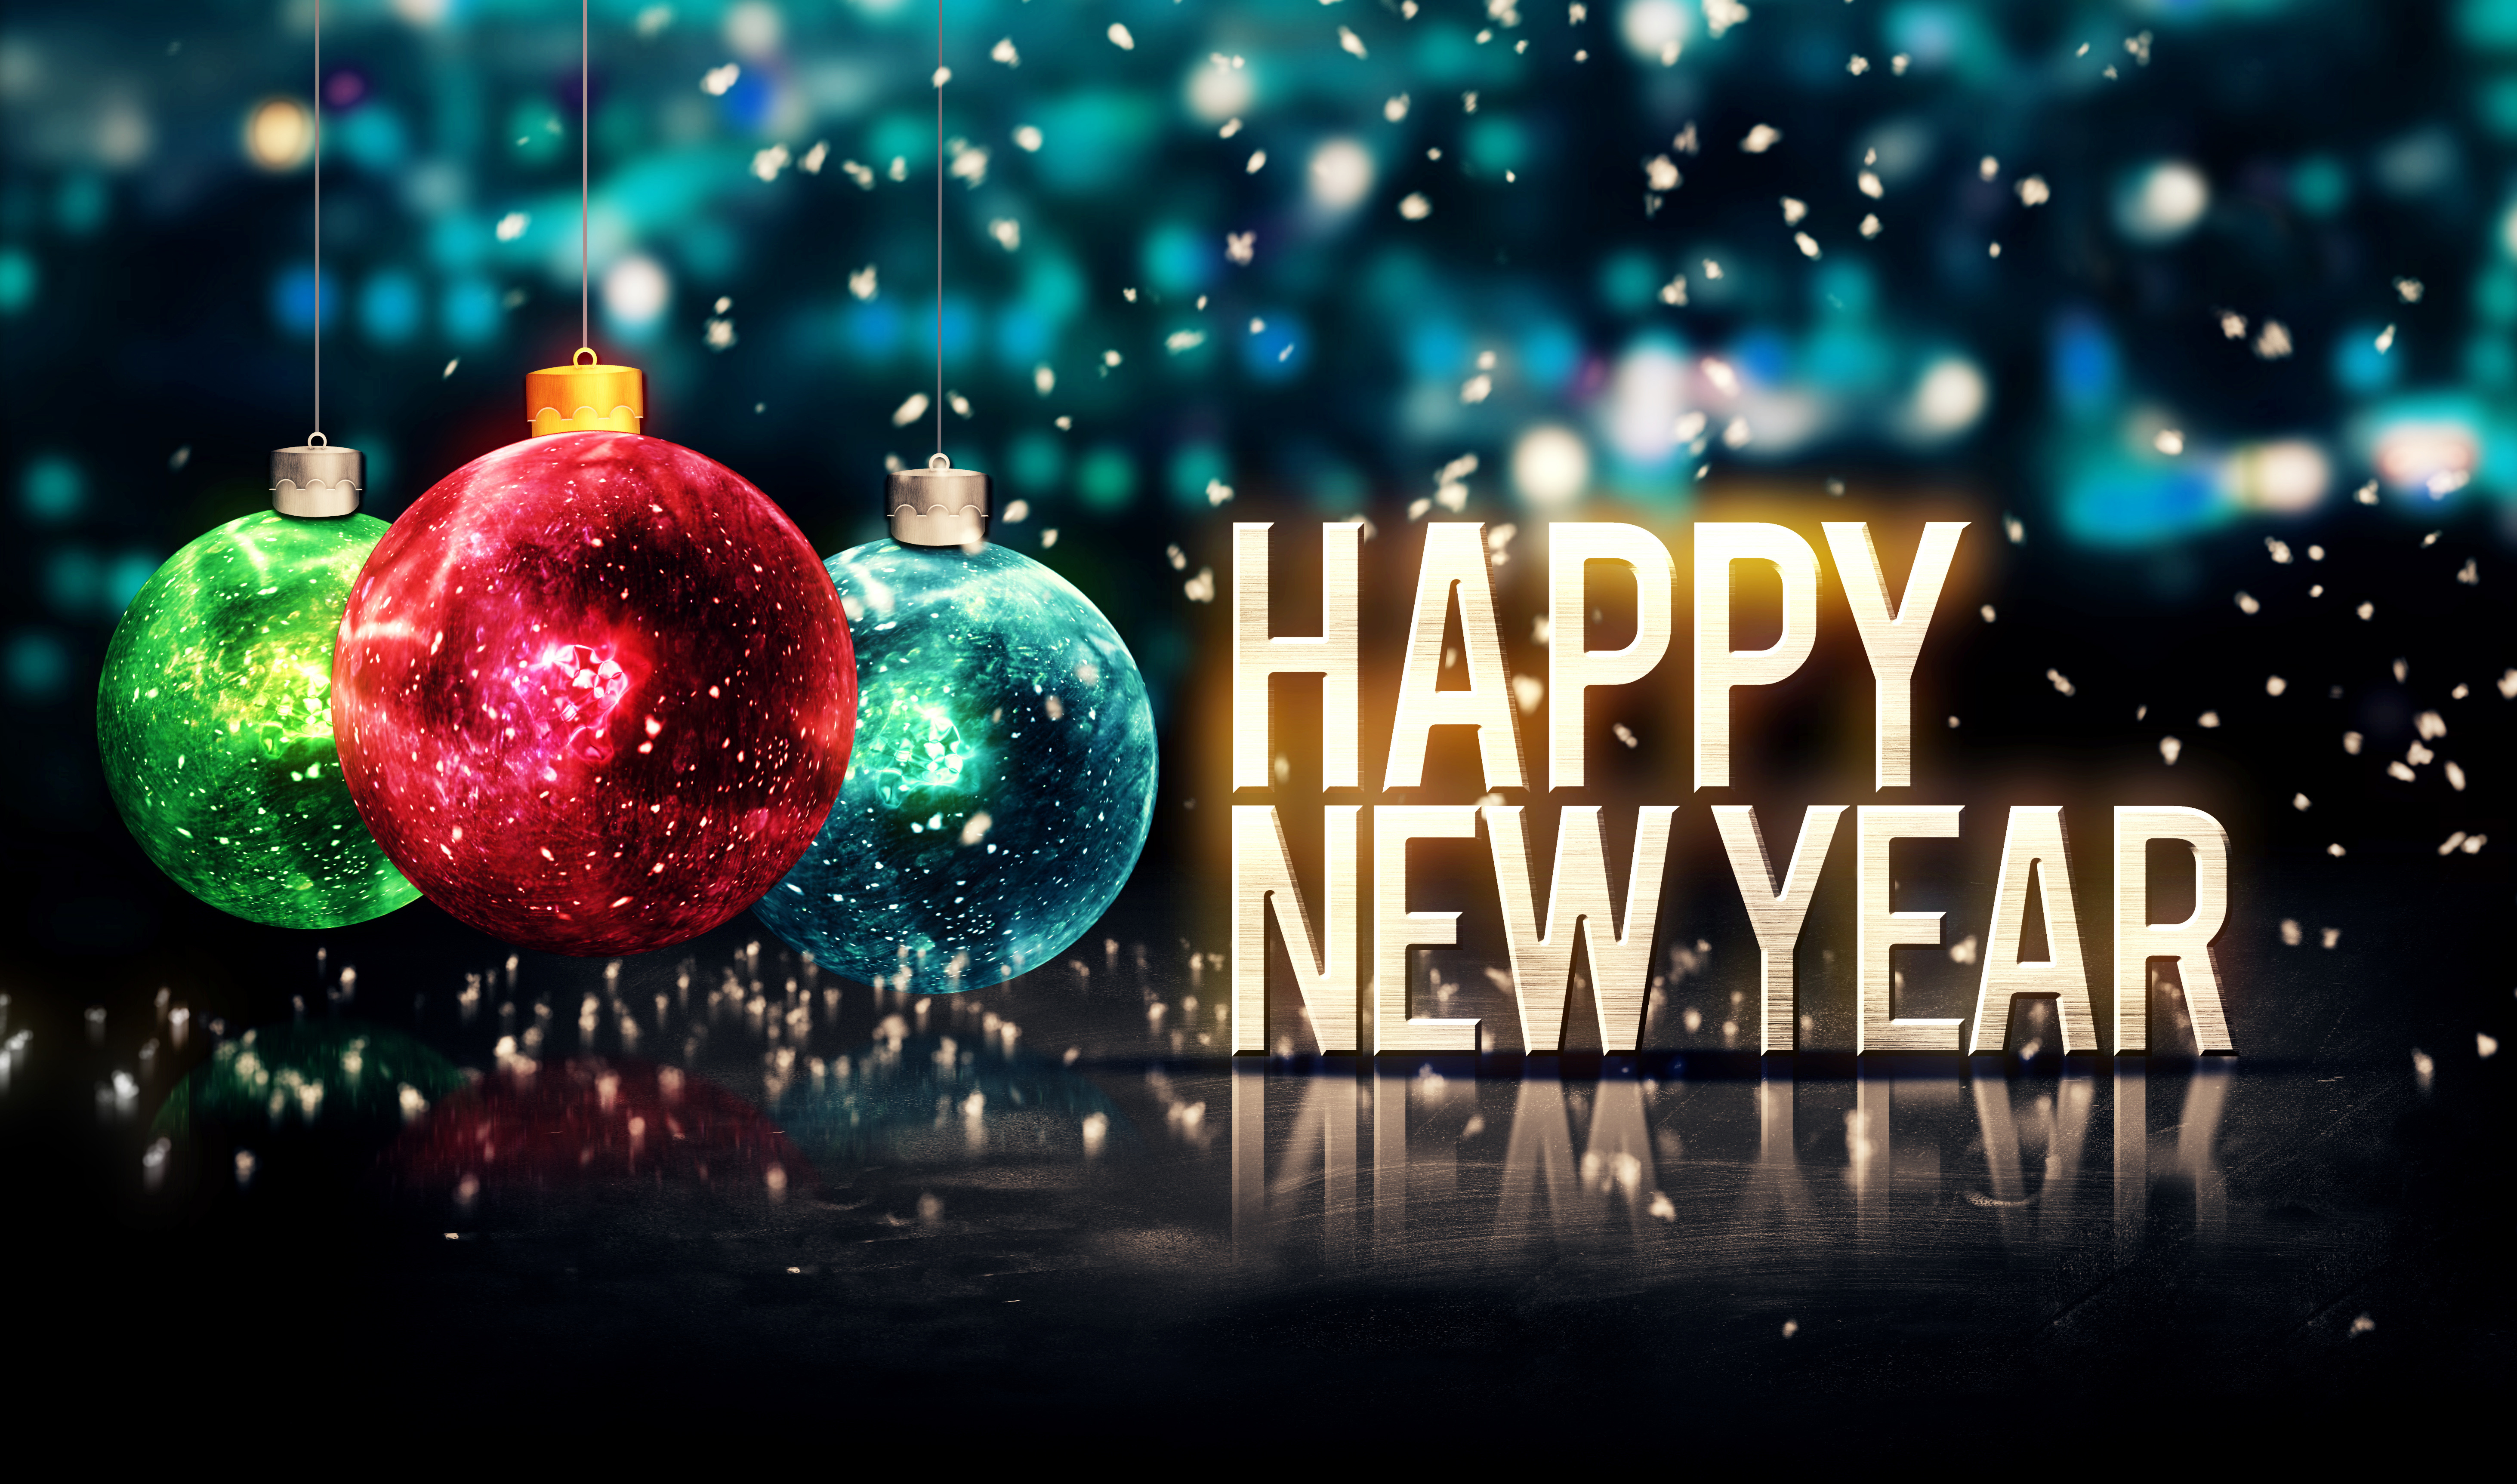 New Year 2016 Backgrounds, Compatible - PC, Mobile, Gadgets| 5850x3450 px